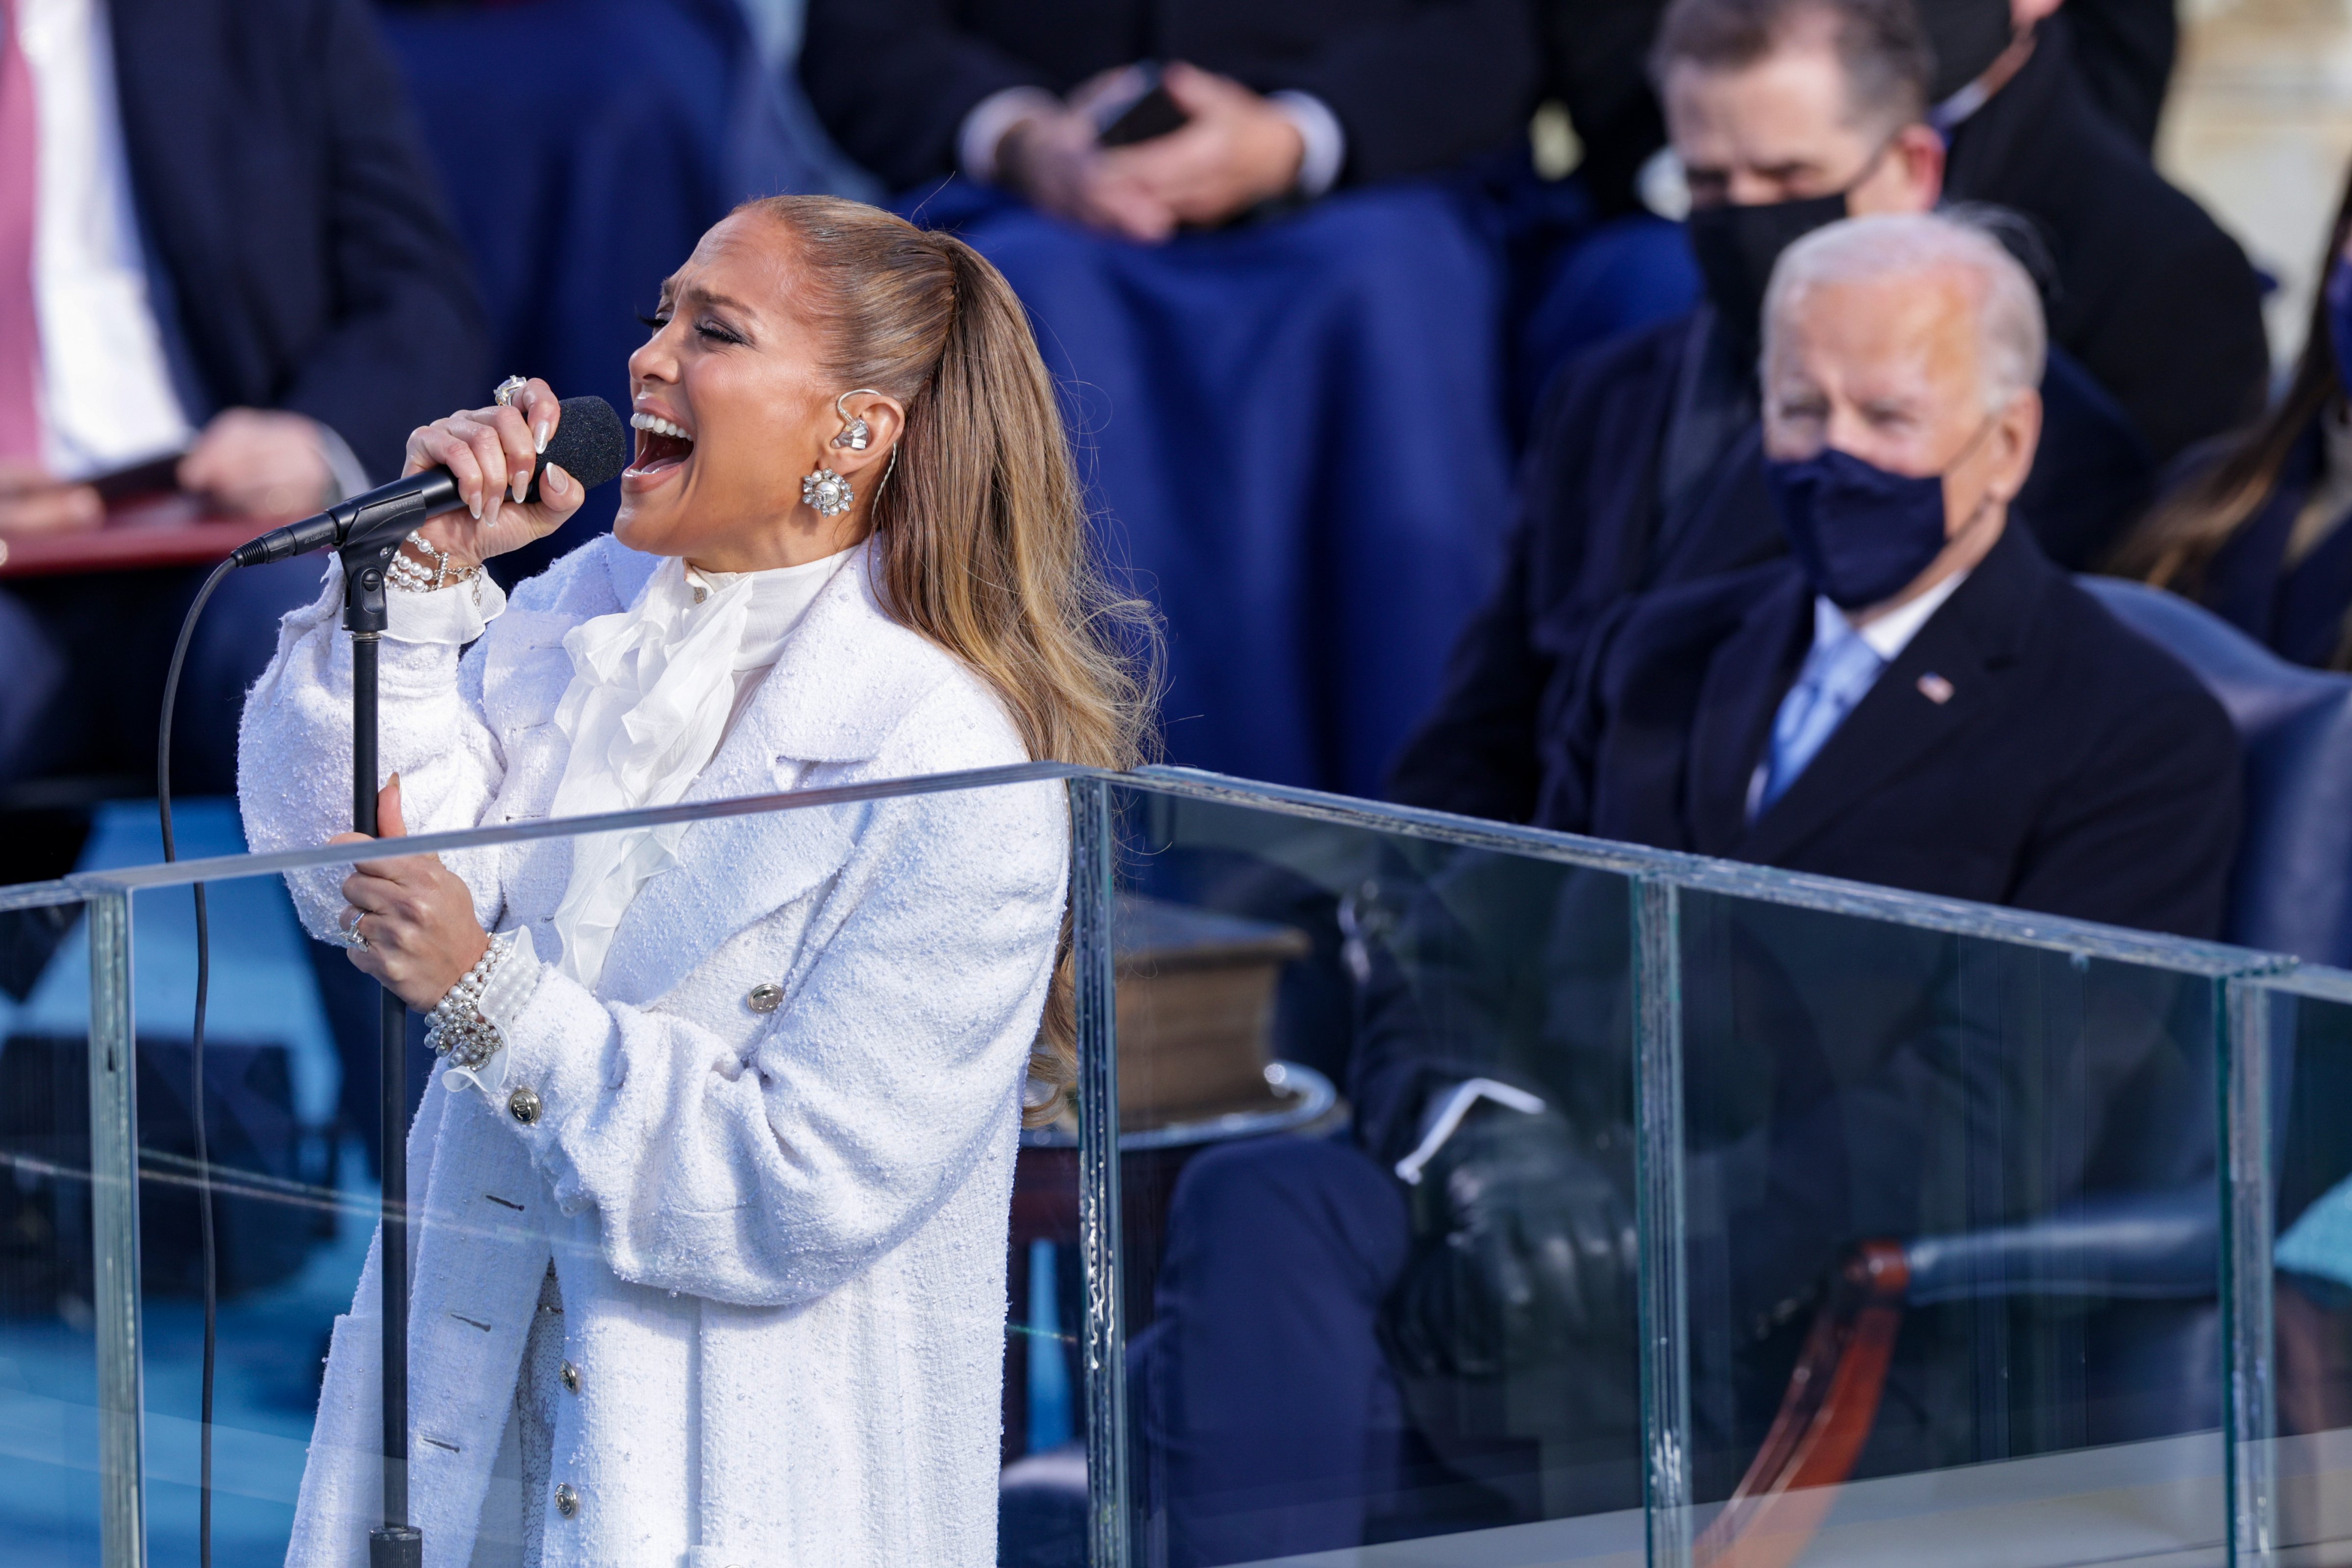 Jennifer Lopez sings during the inauguration of U.S. President-elect Joe Biden on the West Front of the U.S. Capitol on January 20, 2021 in Washington, DC. (Getty Images—2021 Getty Images)